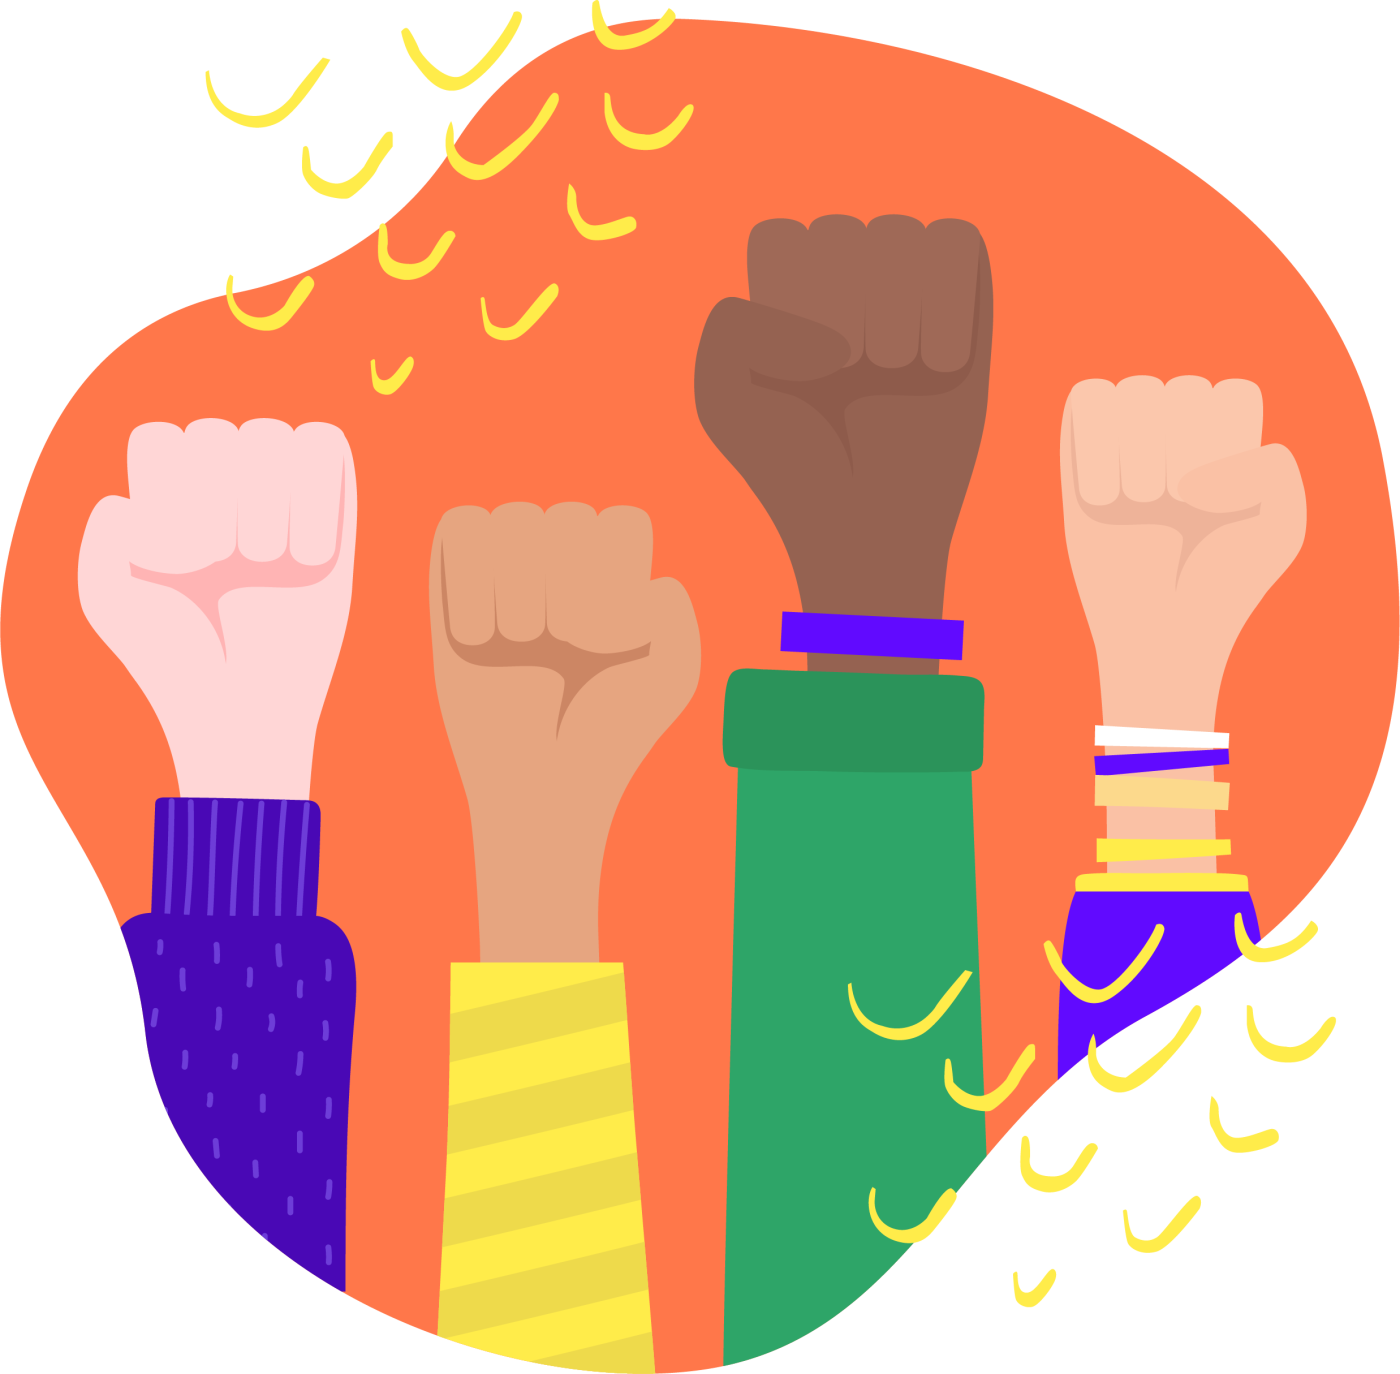 Four fists are raised in solidarity against an orange background.